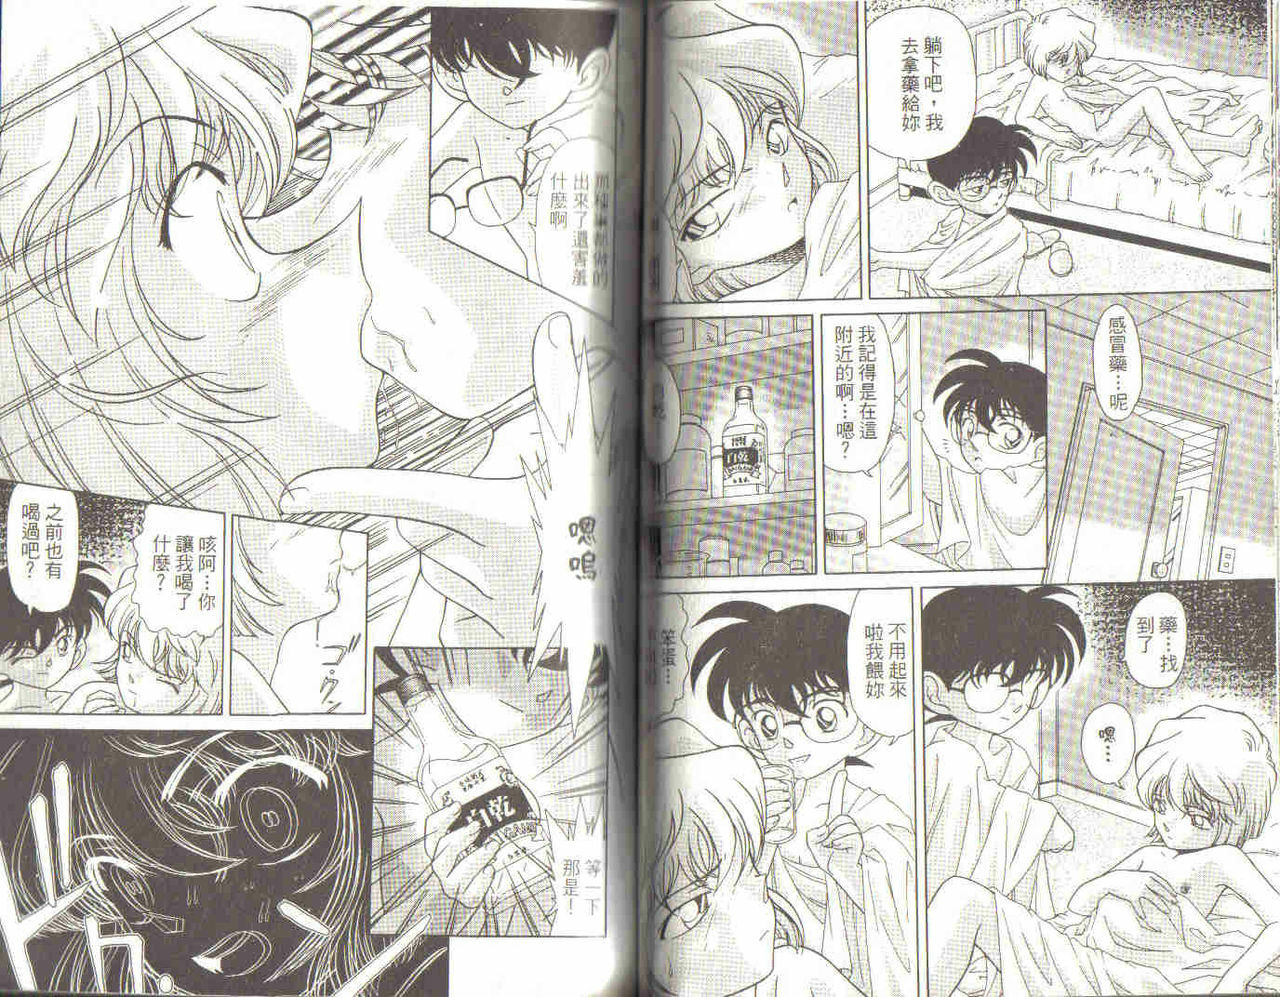 [Ooya Nako] Detective Assistant Vol. 3 (Detective Conan) [Chinese] page 46 full